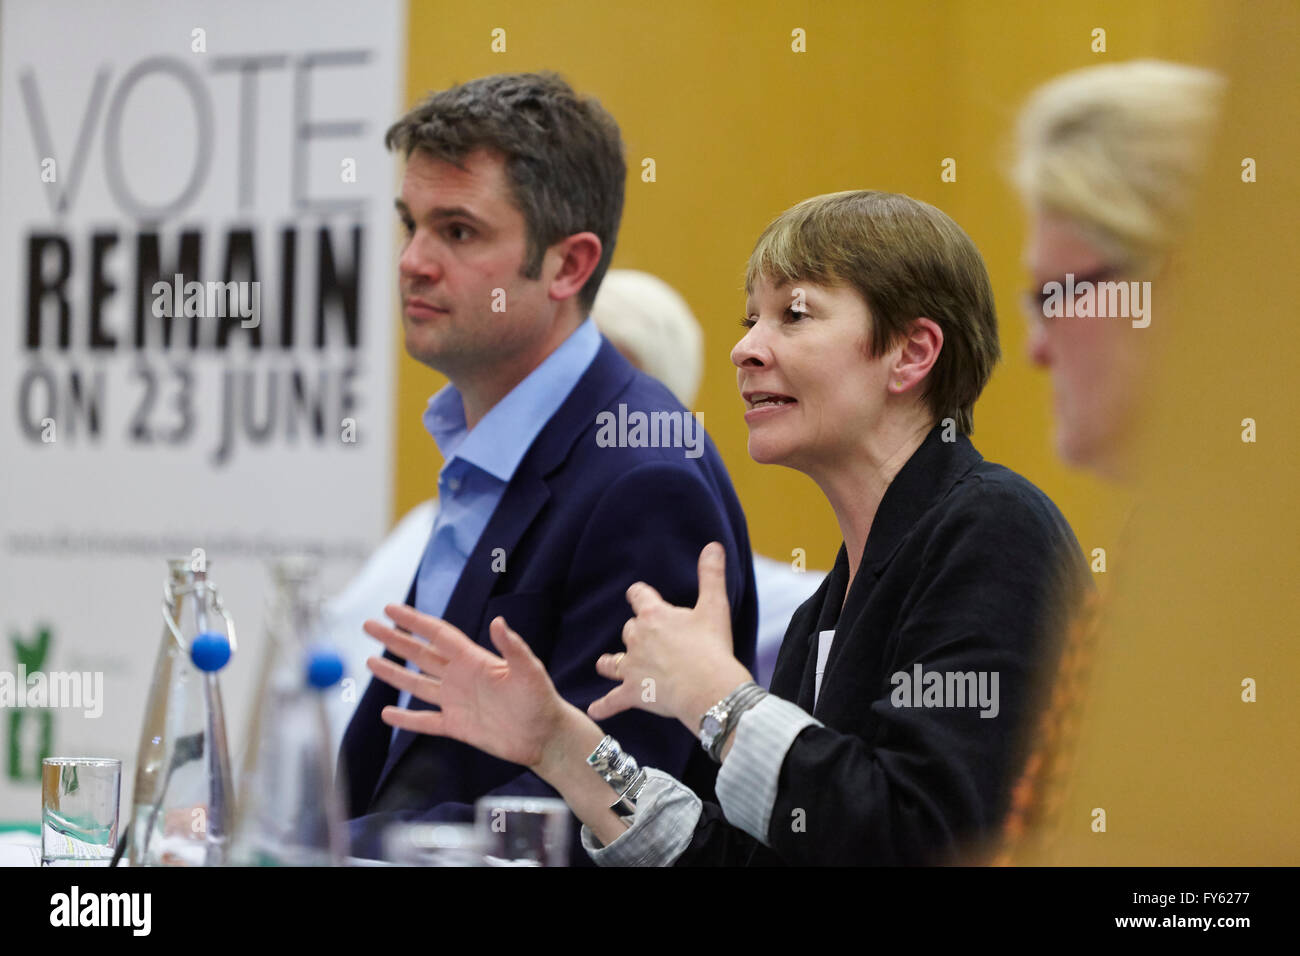 London, UK. 21st April, 2016. Green Party member Caroline Lucas speak at a Friends of the Earth and Environmentalists for Europe Remain Campaign Rally. Held at King's College London. UK. 21st April 2016 Credit:  Sam Barnes/Alamy Live News Stock Photo